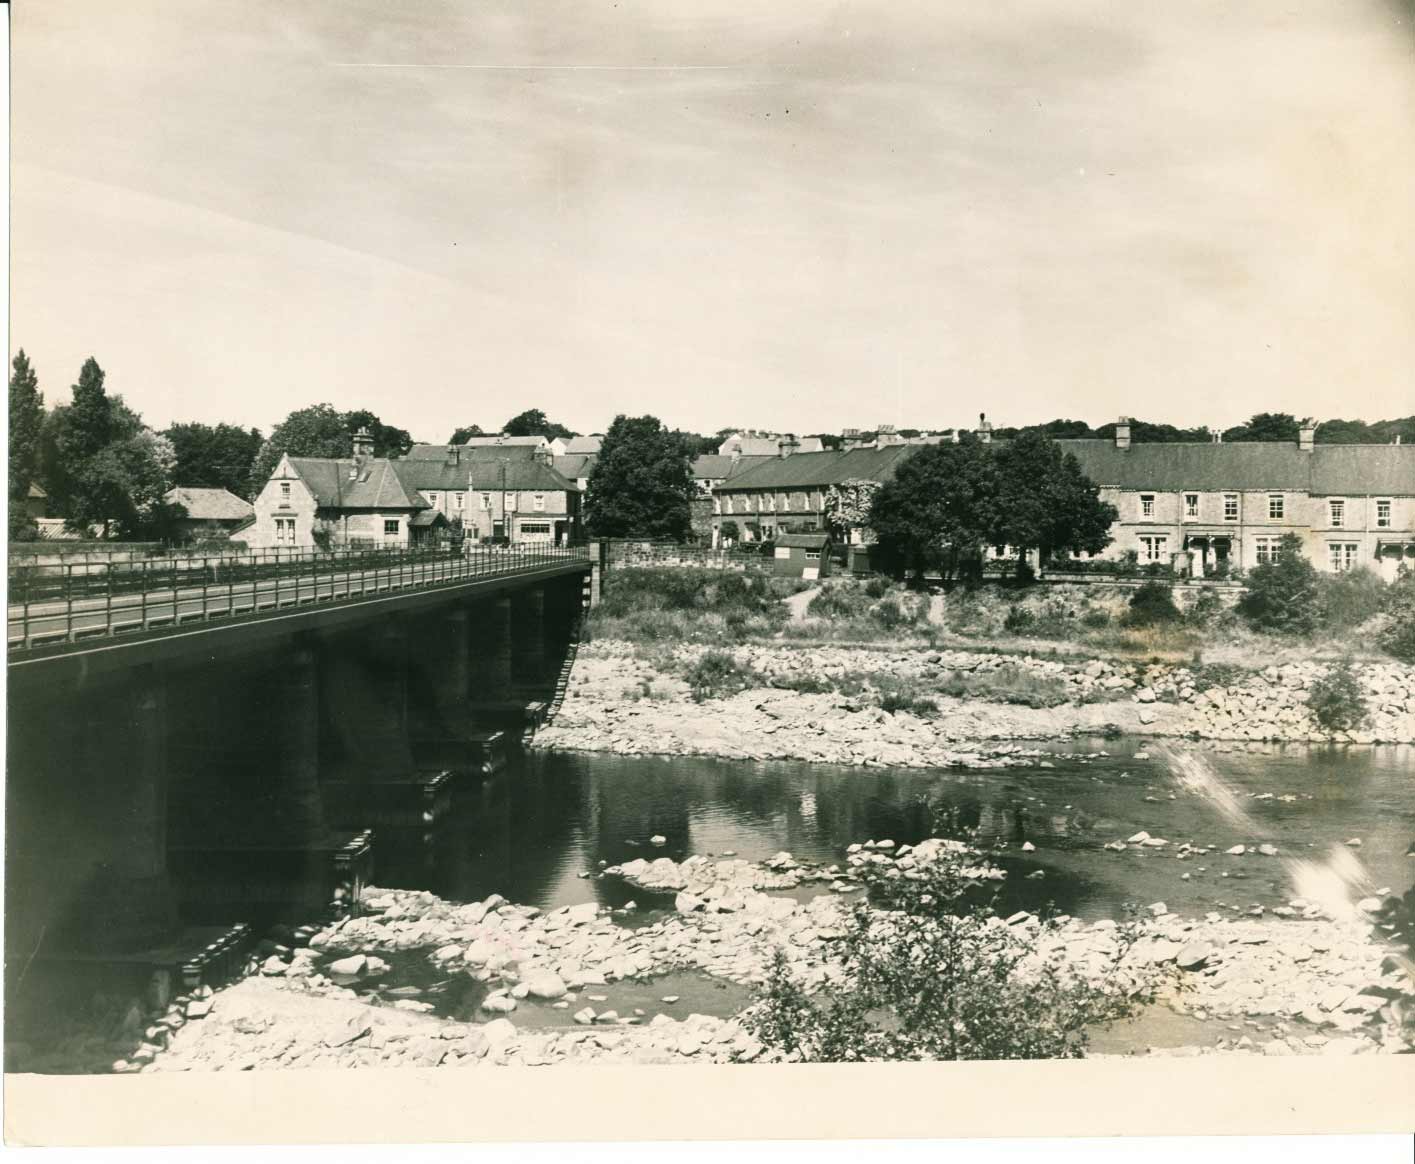 Wylam Bridge from the South East in June 1955